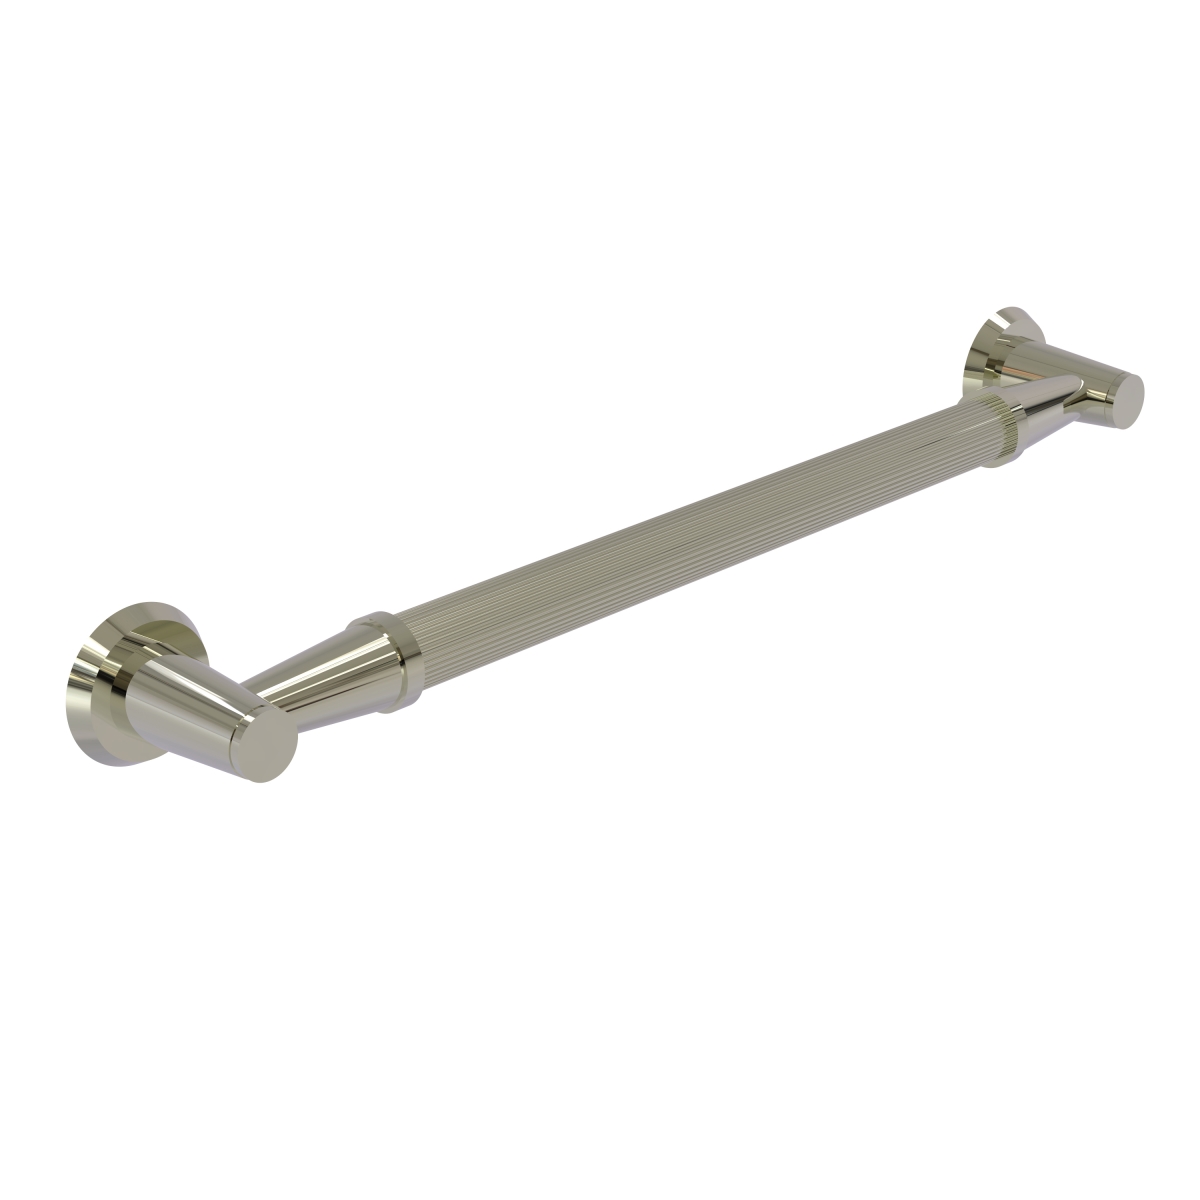 Picture of Allied Brass MD-GRR-36-PNI 36 in. Reeded Grab Bar, Polished Nickel - 3.5 x 38 x 36 in.